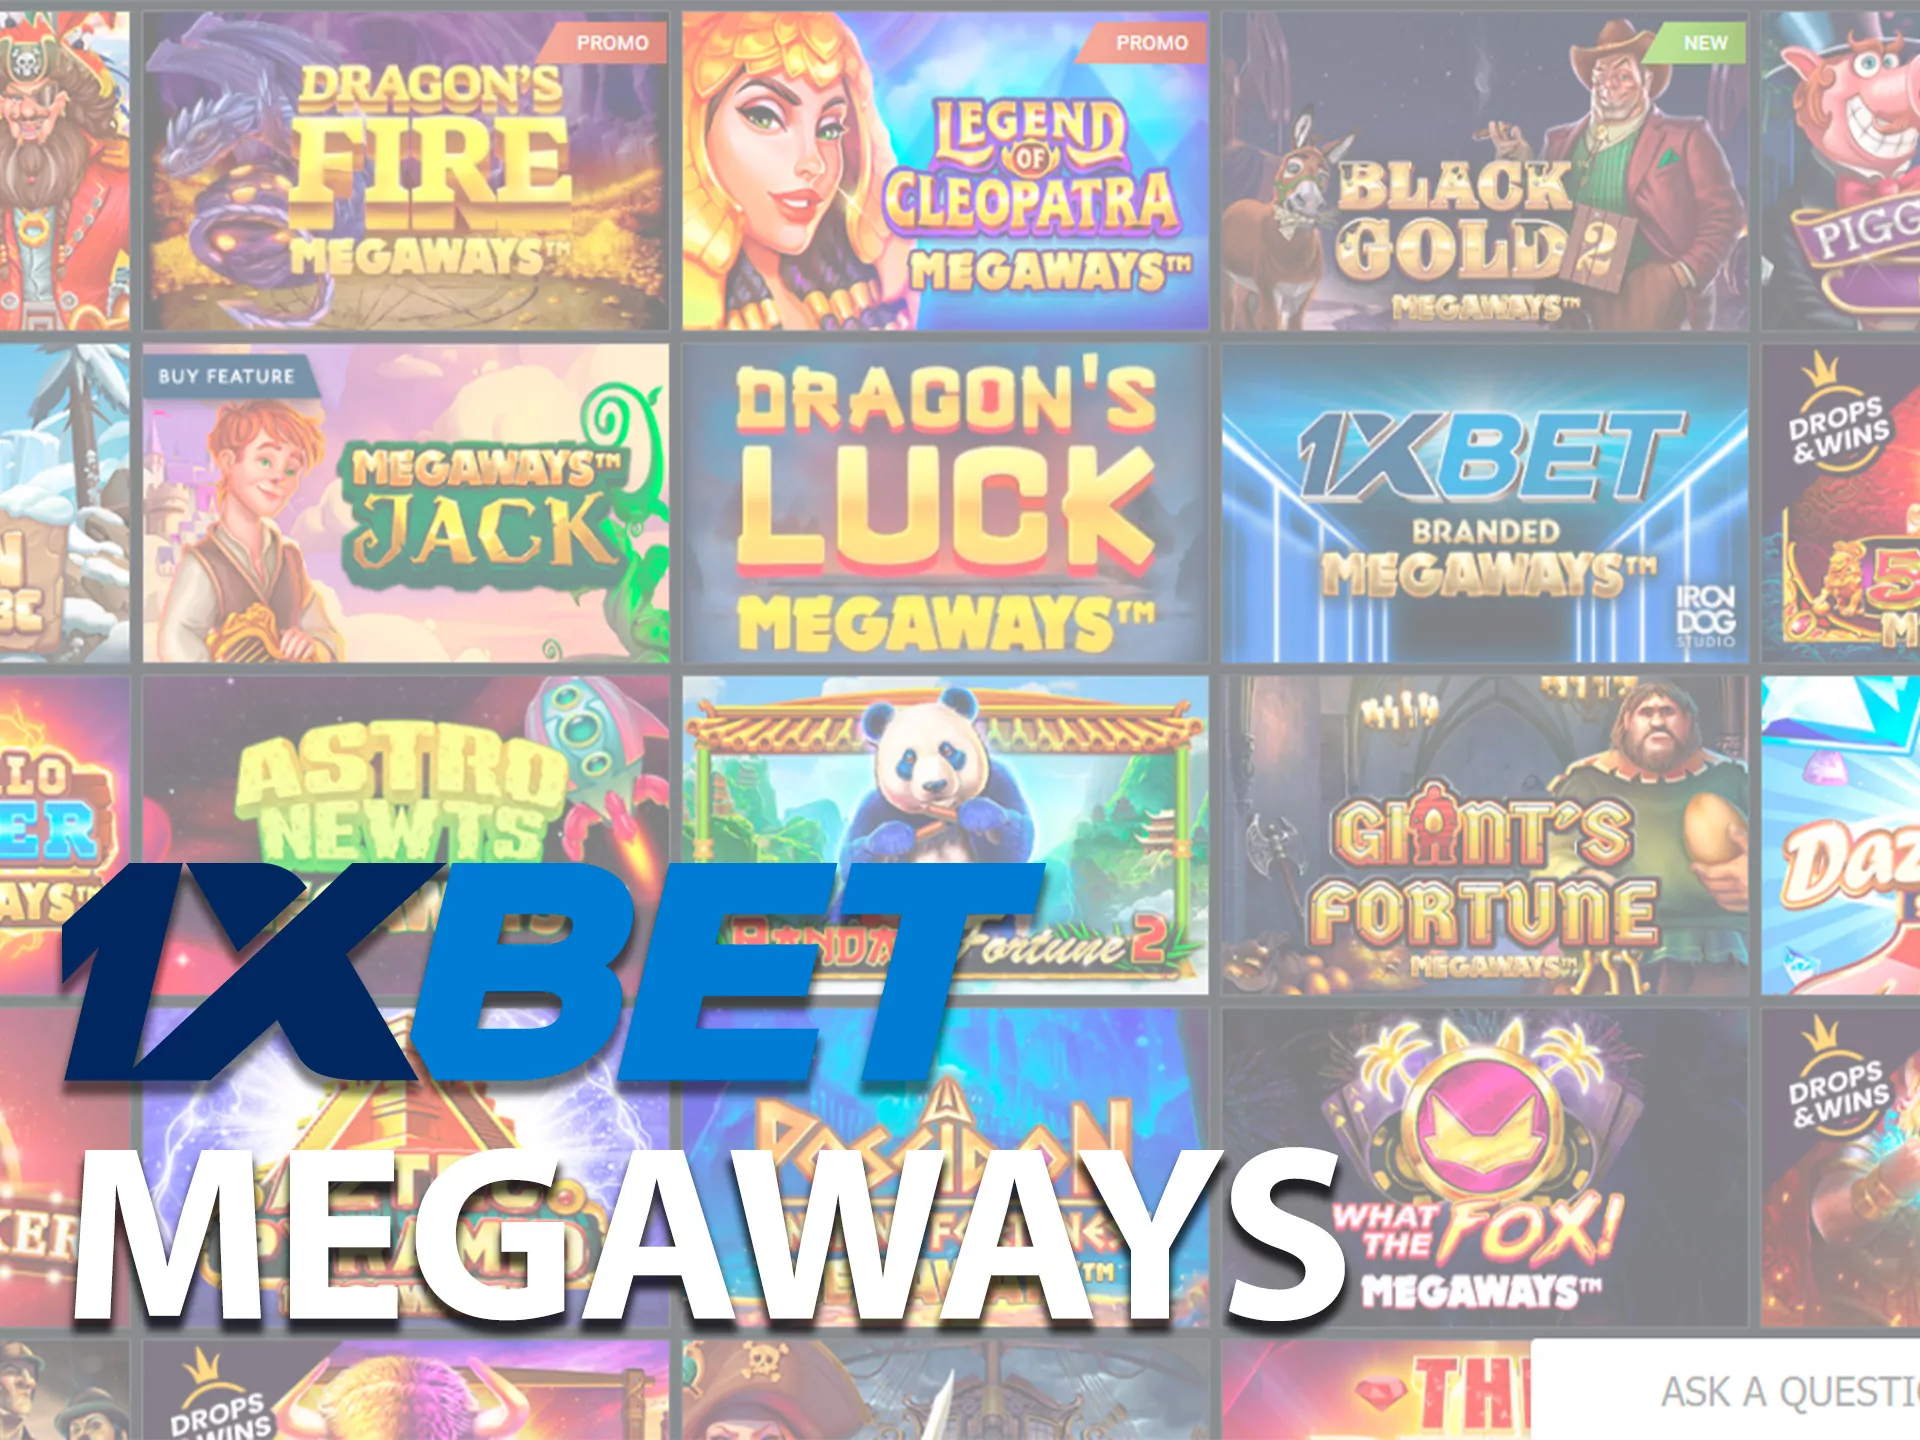 There are lots of different megaways slots at the 1xbet online casino.